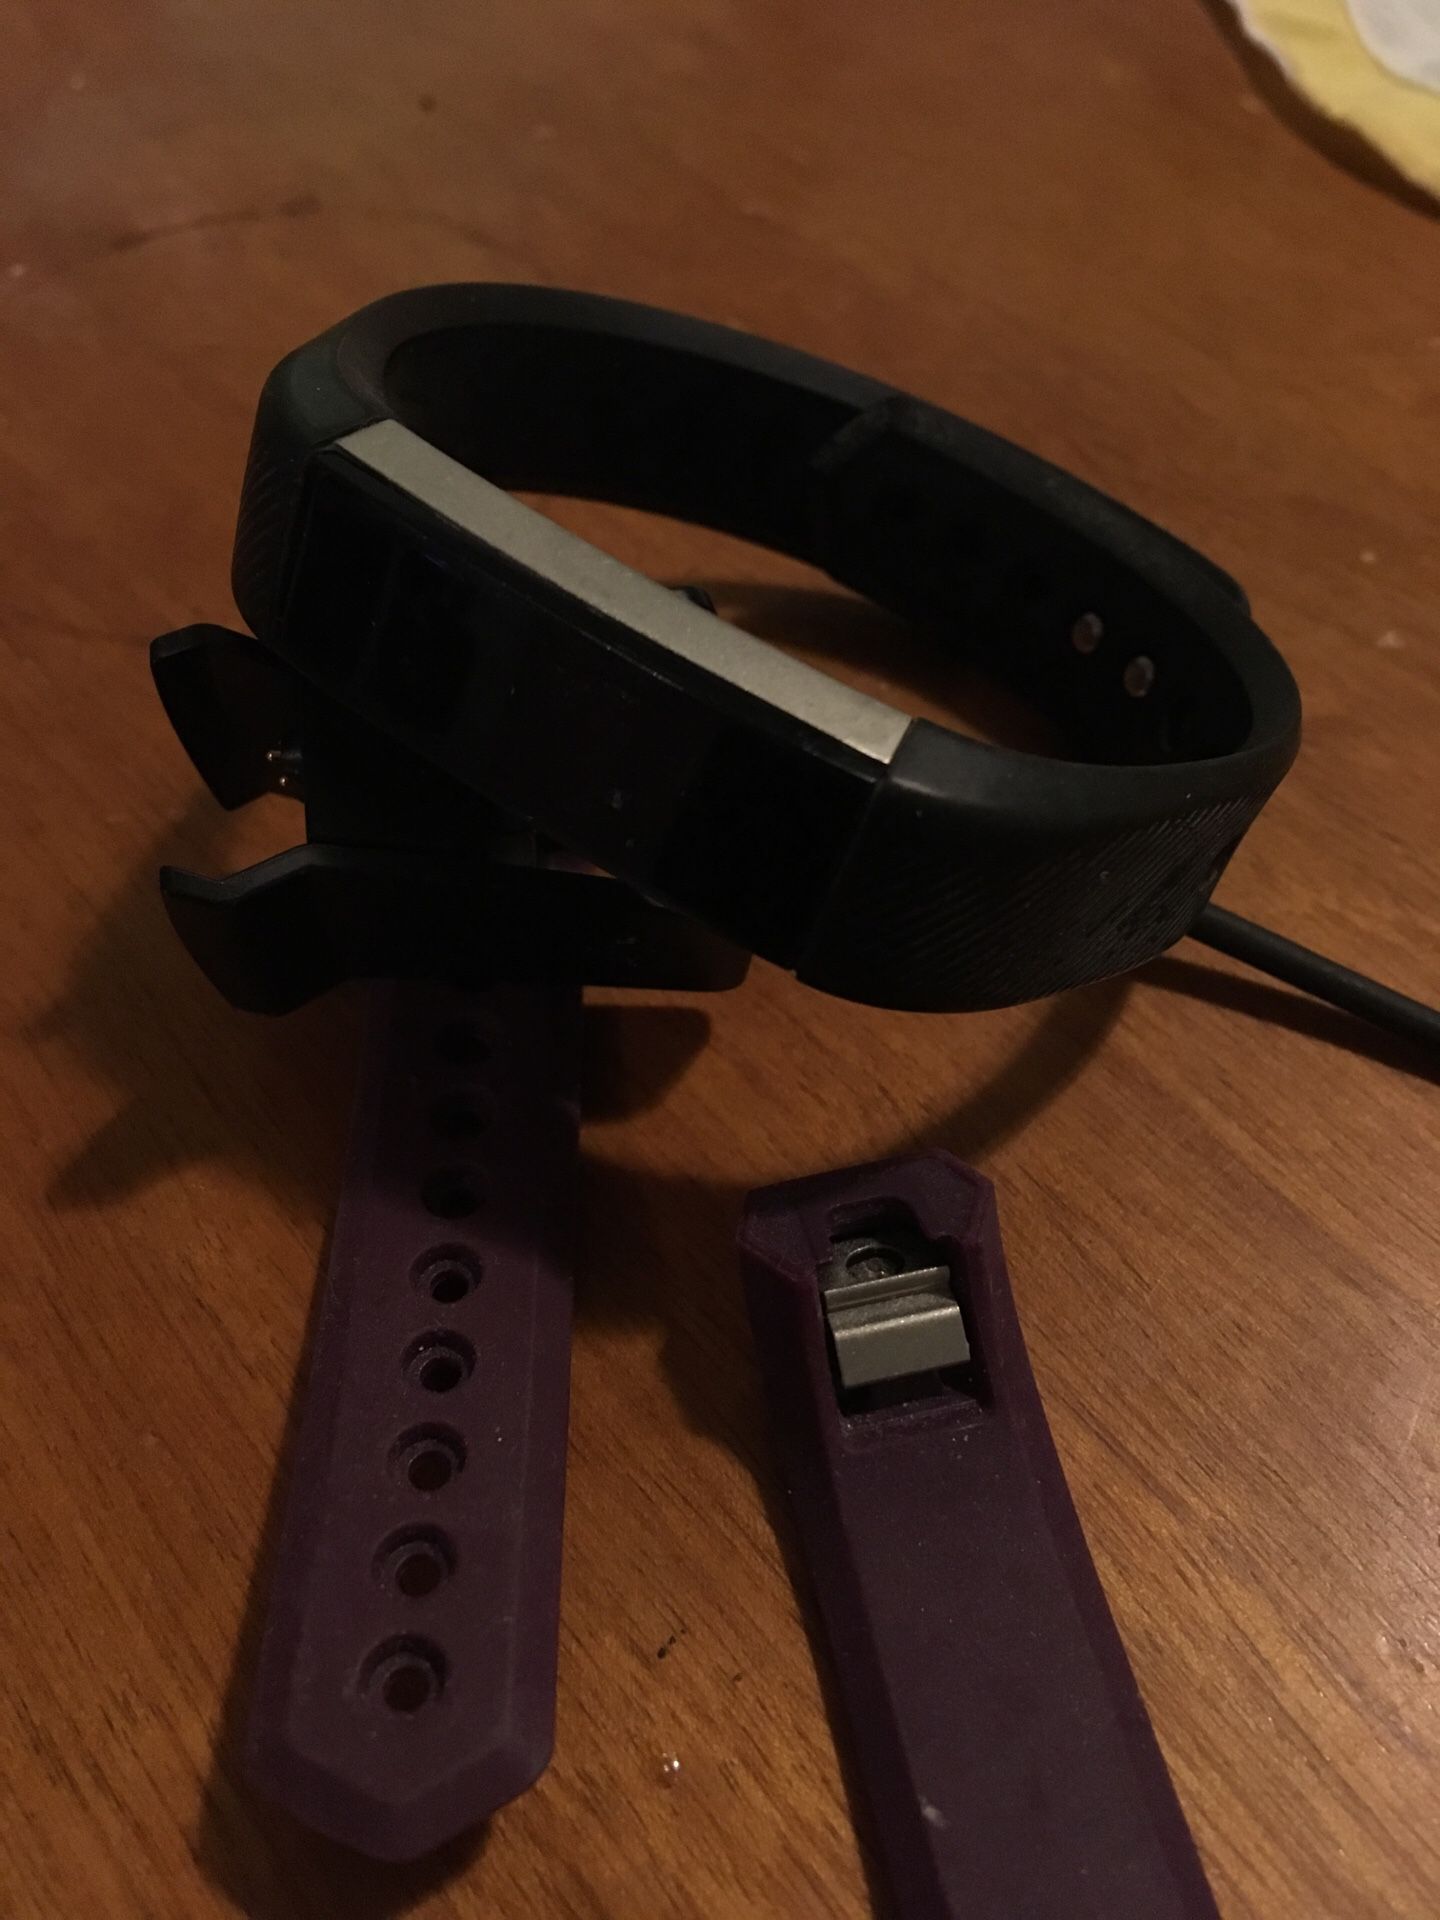 Fitbit with extra strap